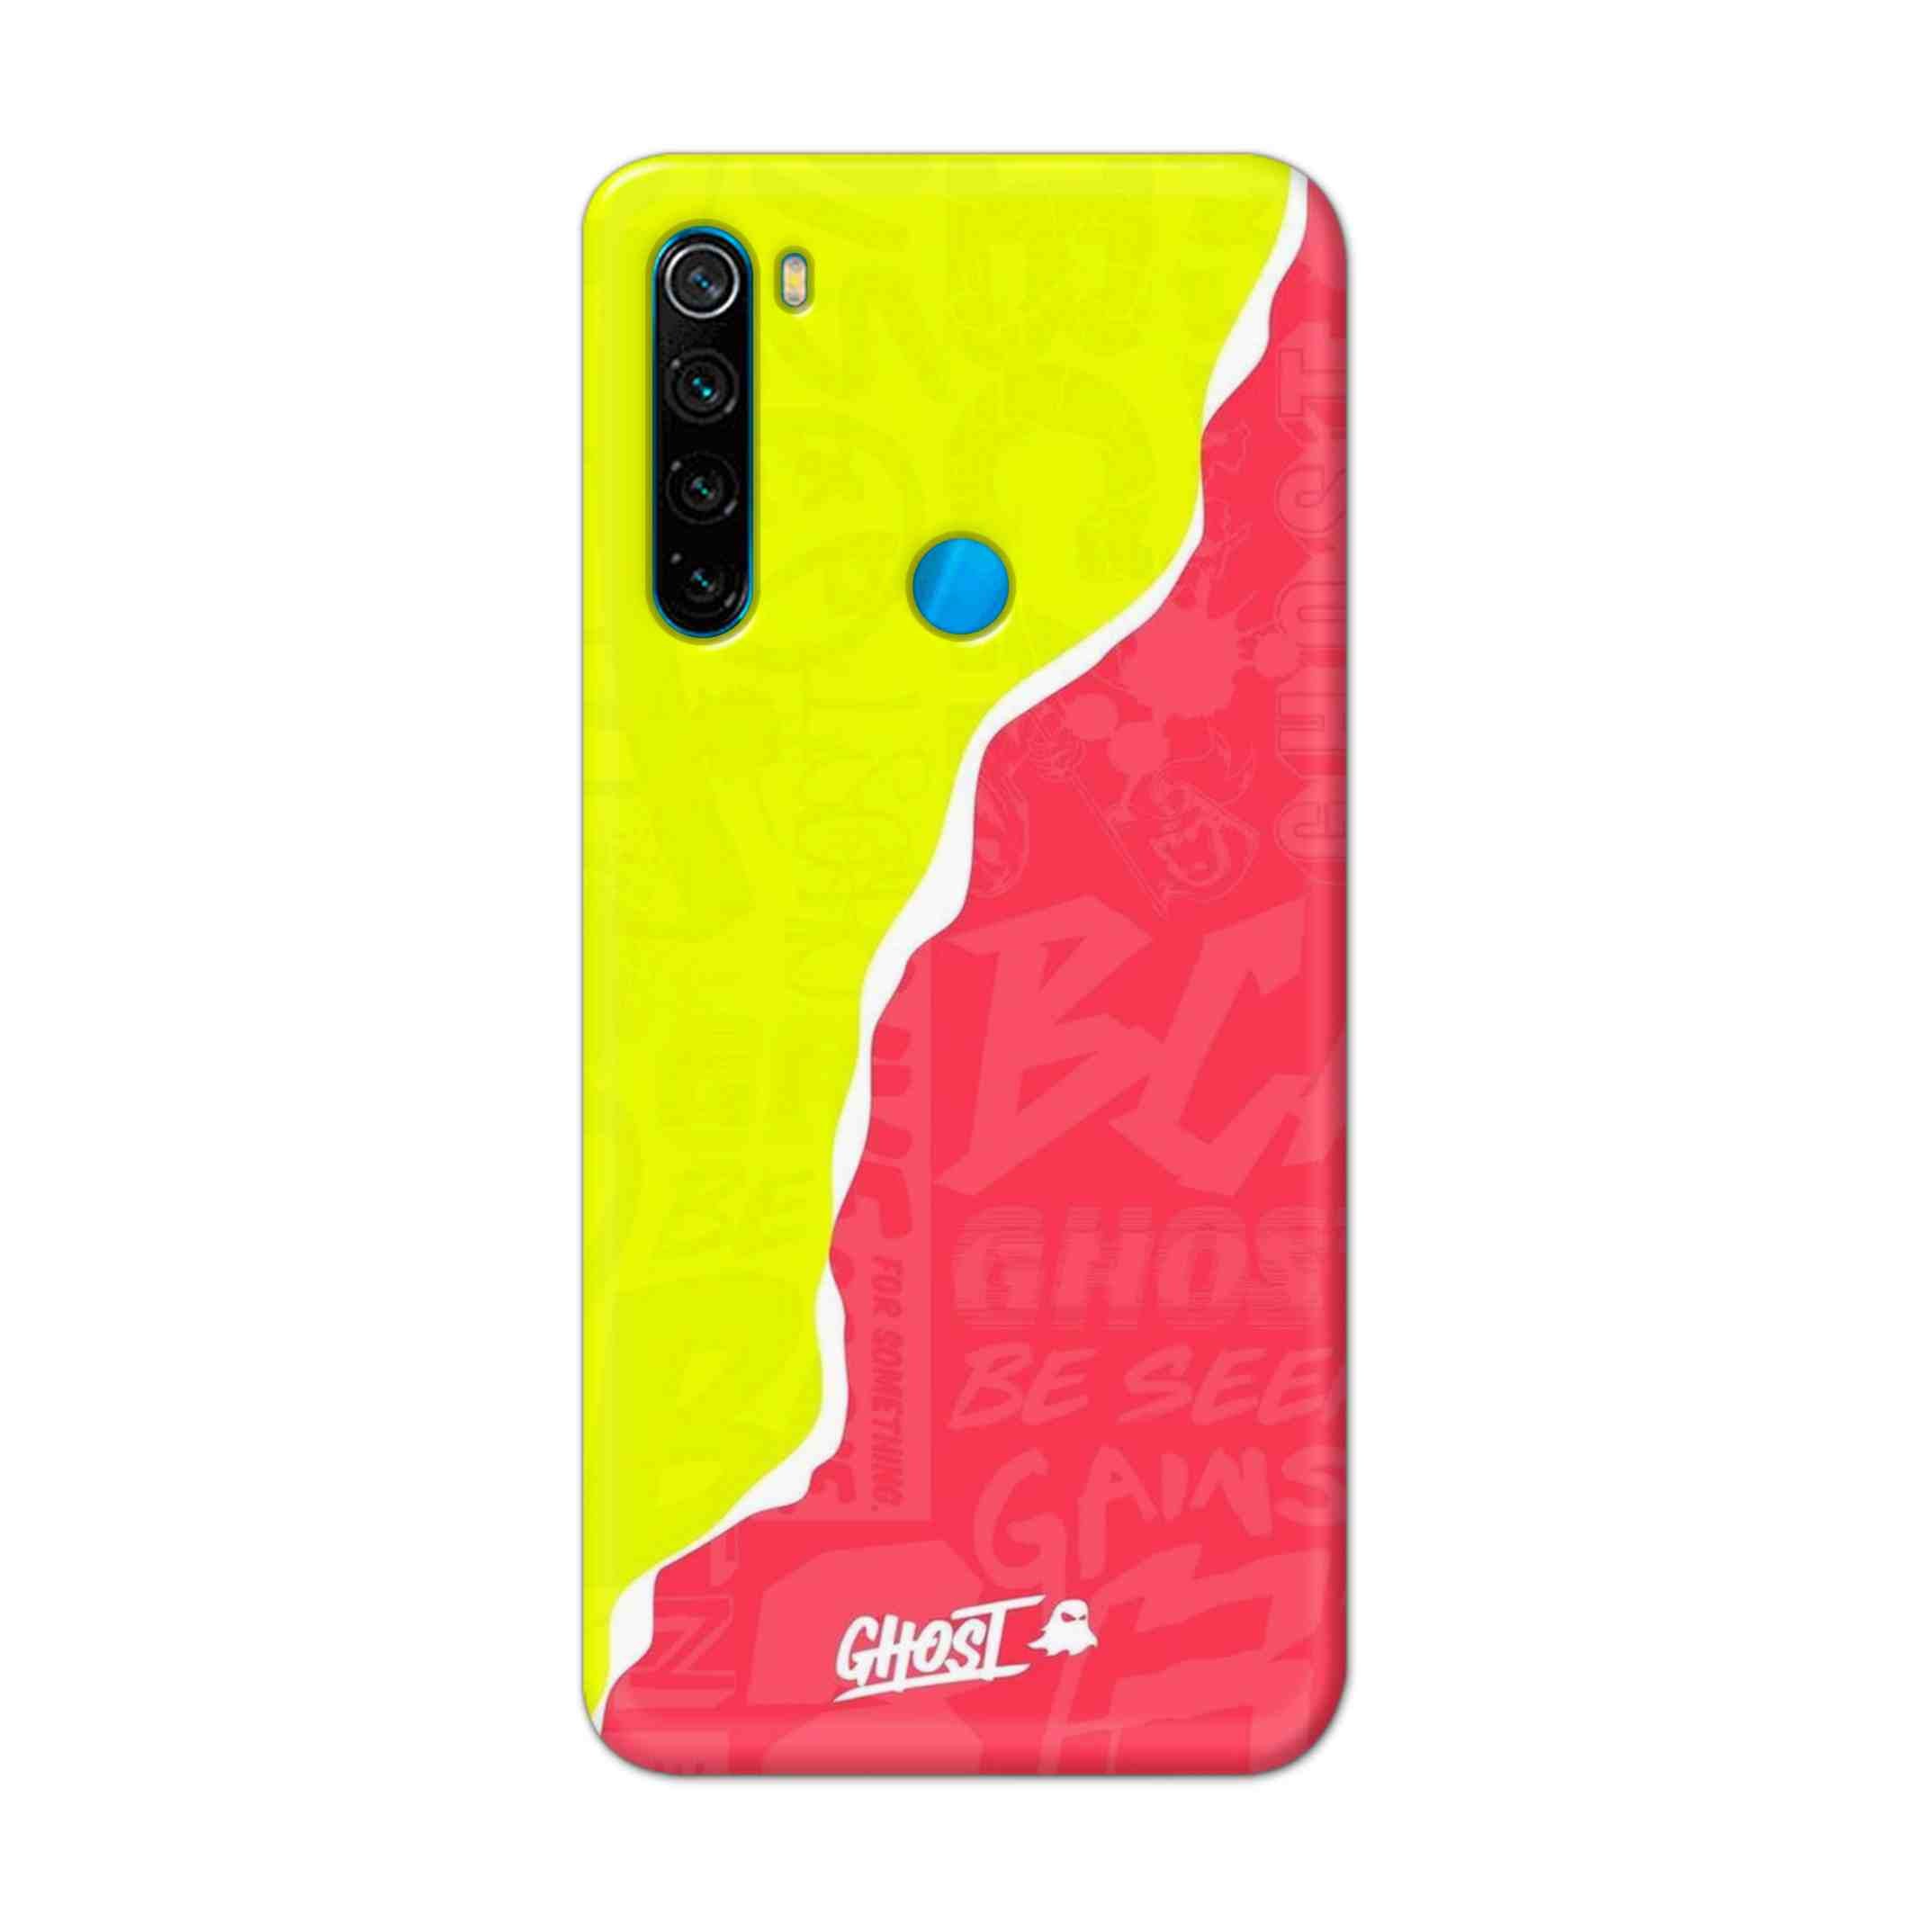 Buy Ghost Hard Back Mobile Phone Case Cover For Xiaomi Redmi Note 8 Online